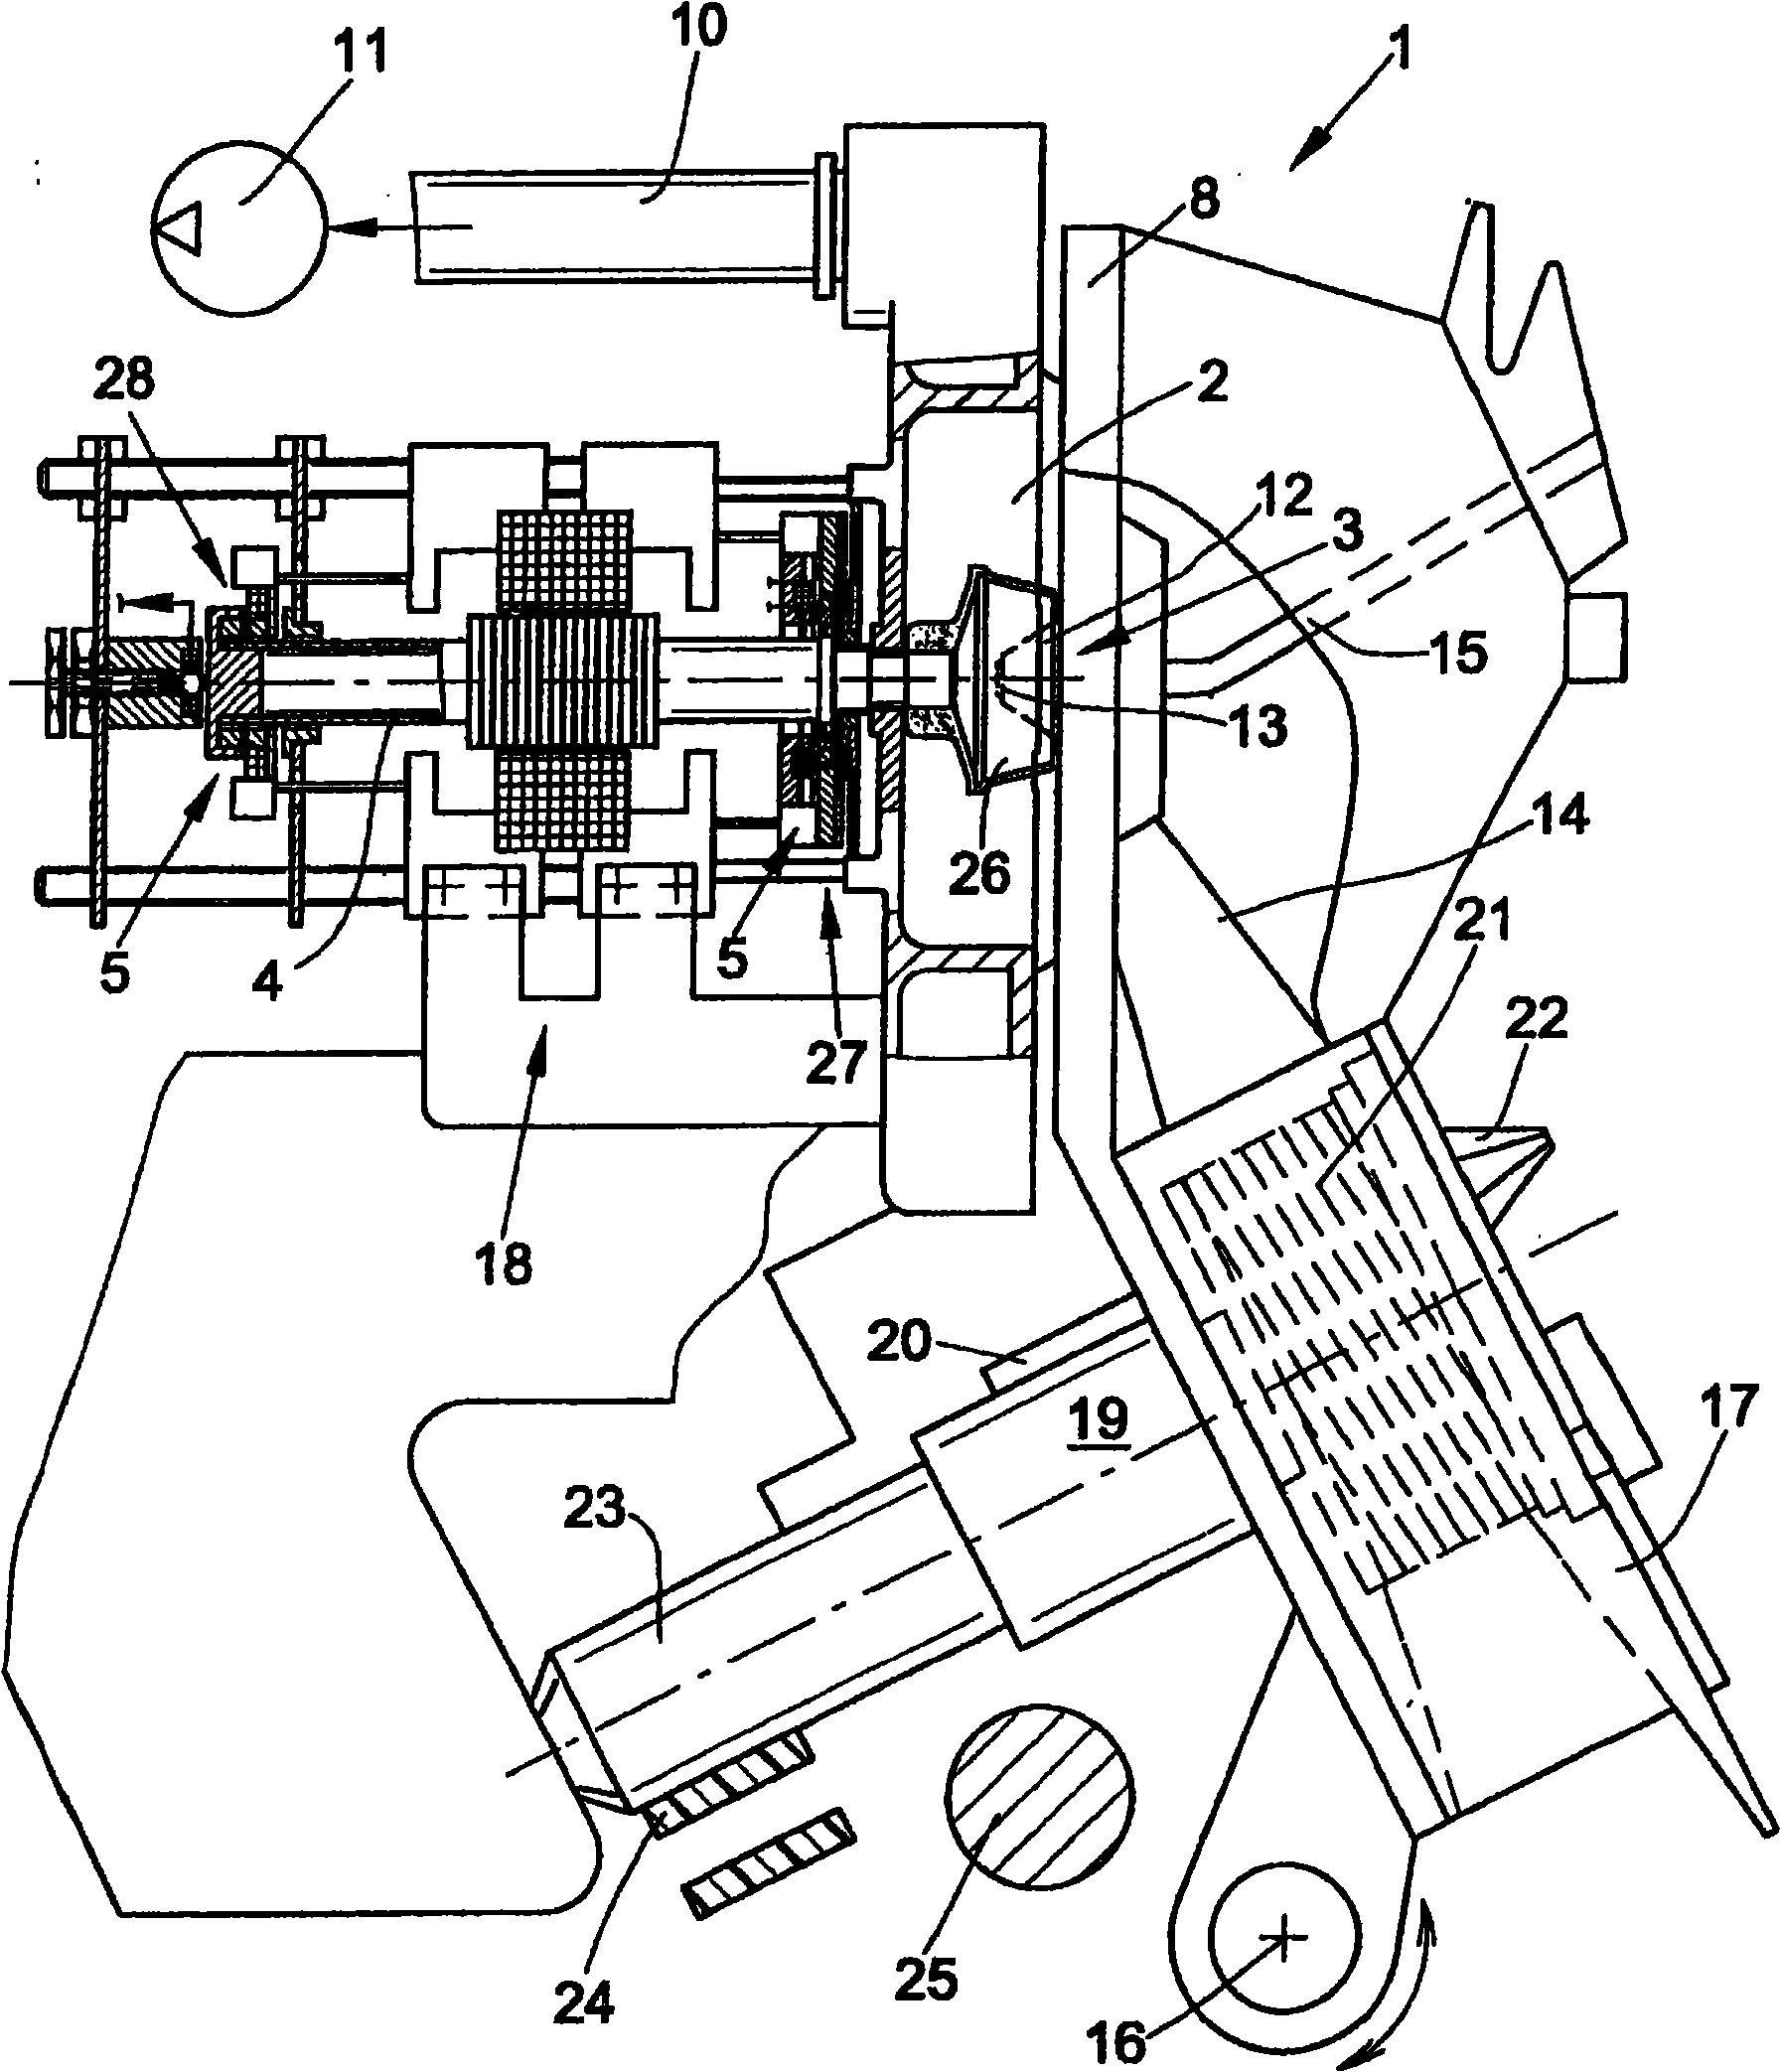 Open-end spinning rotor for textile machine producing cross-wound packages